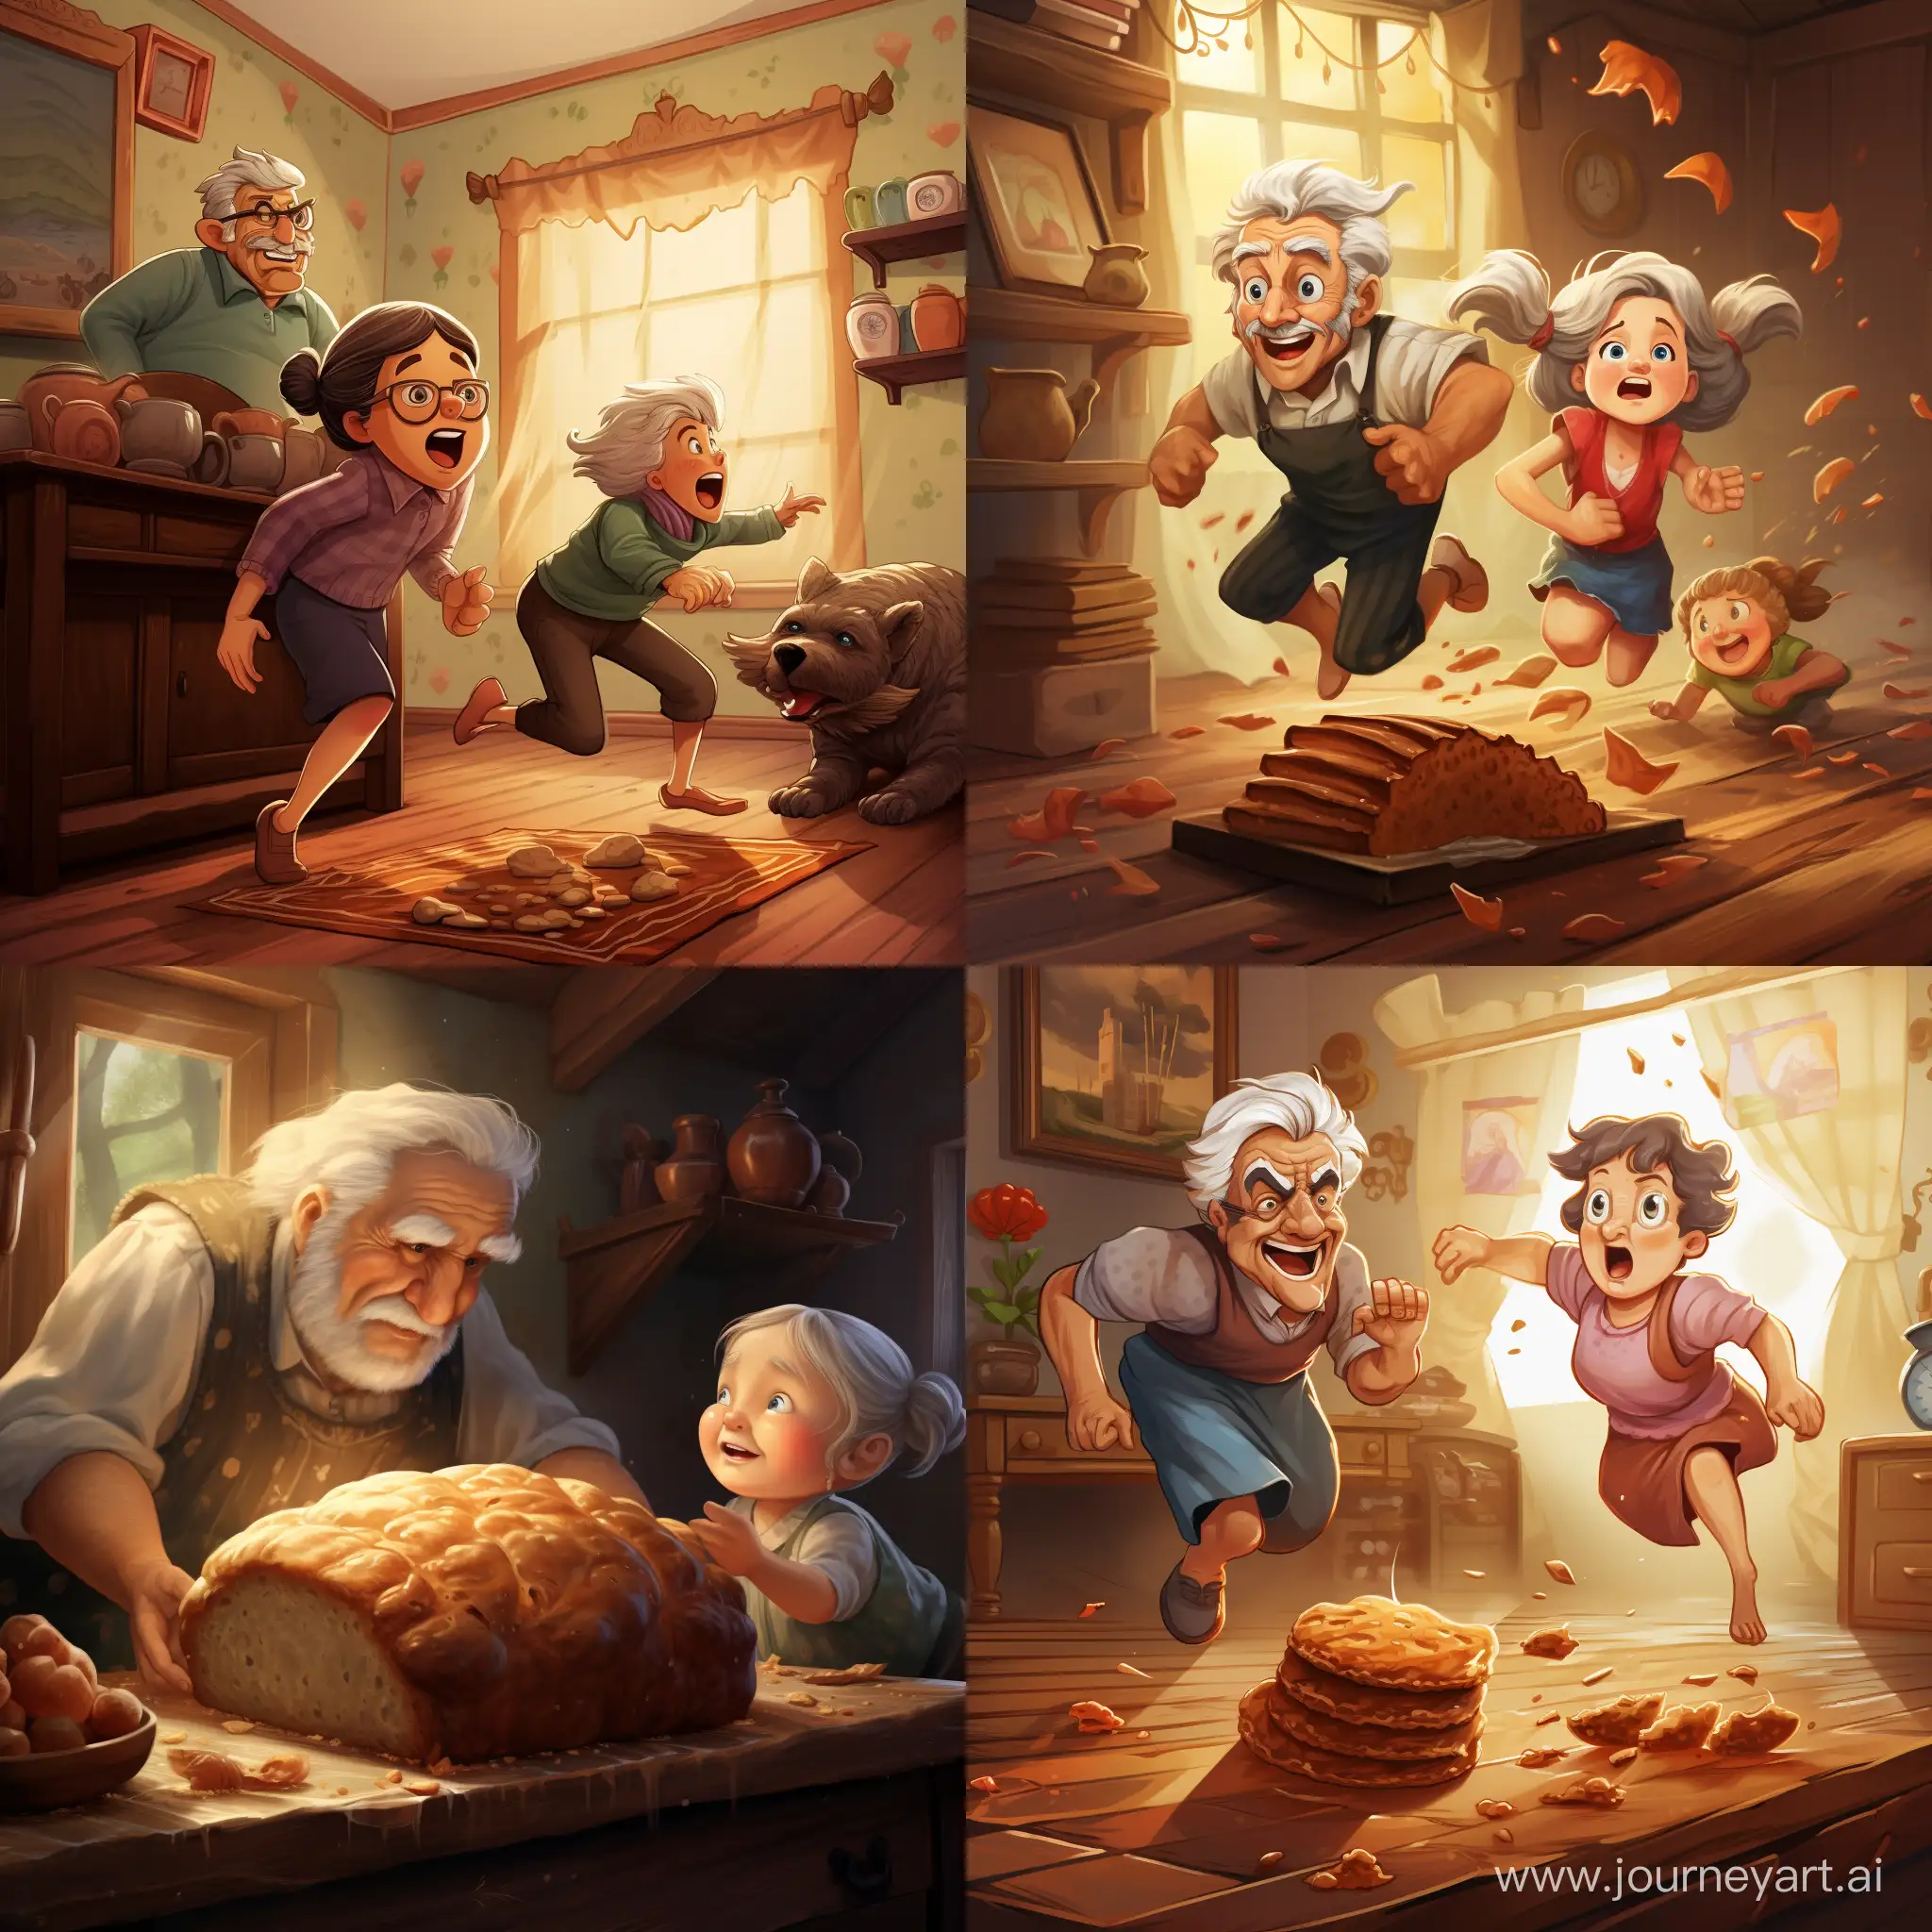 Mischievous-Loaf-Evades-Grandma-and-Grandpa-in-a-Whimsical-Chase